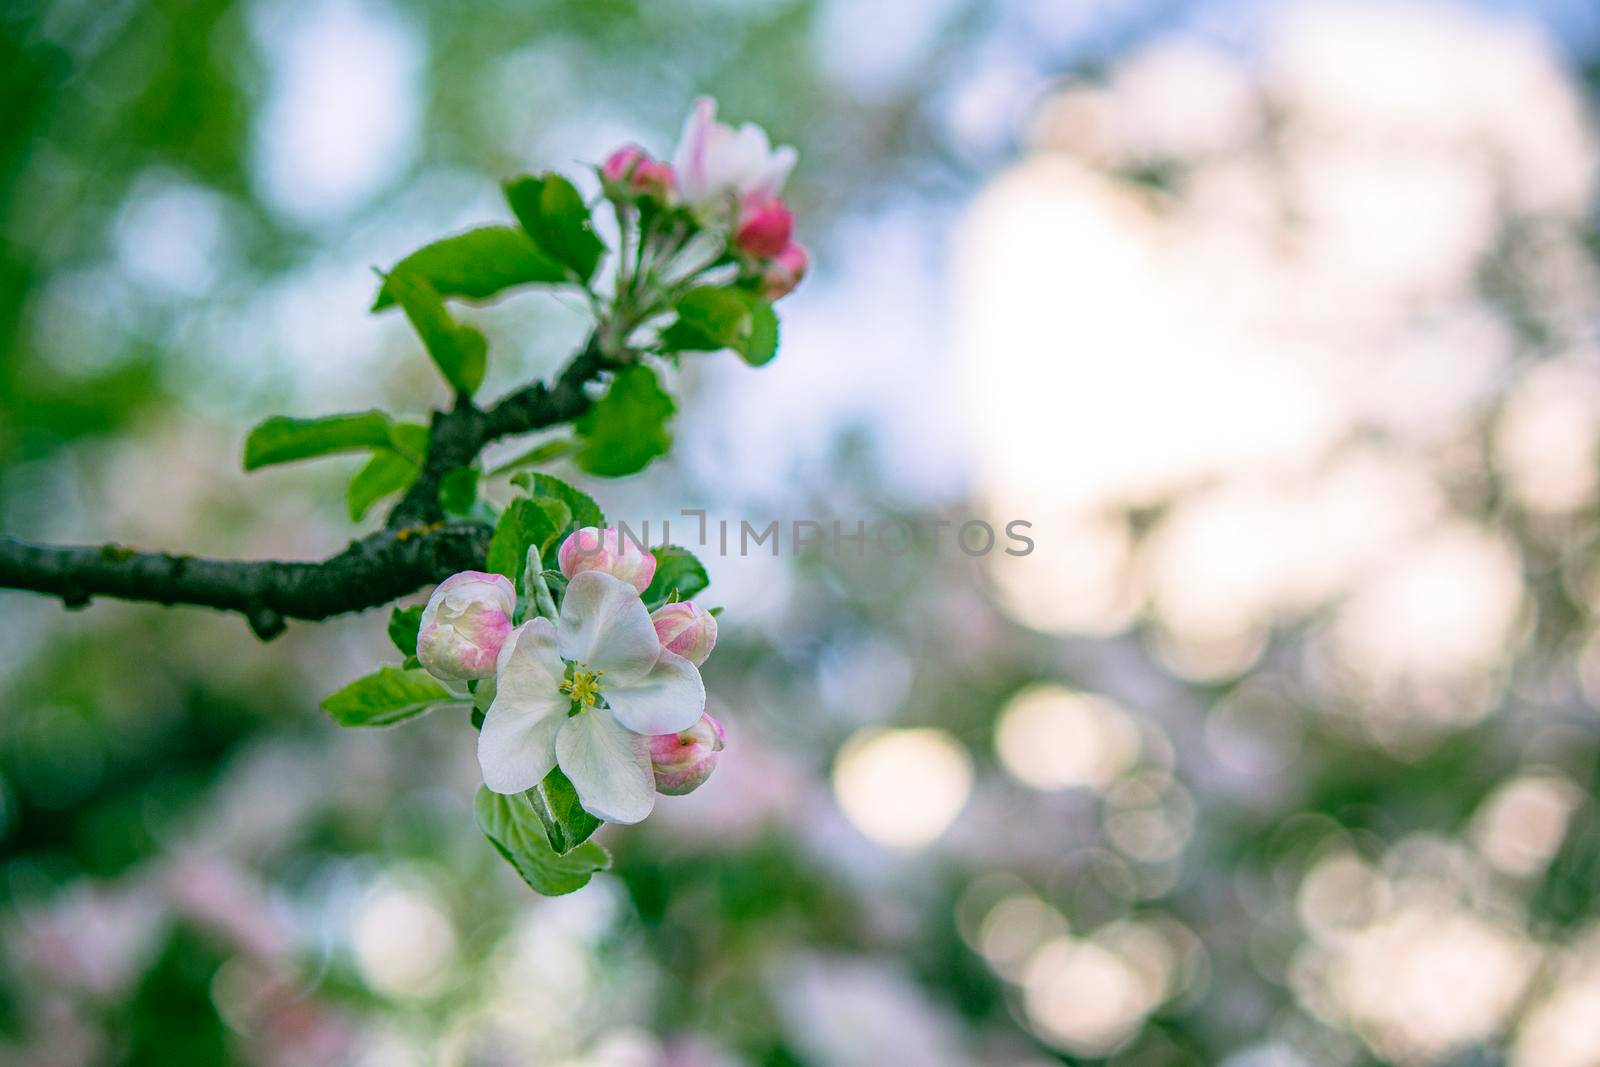 Blooming flowers on a branch of an apple tree in spring by grekoni